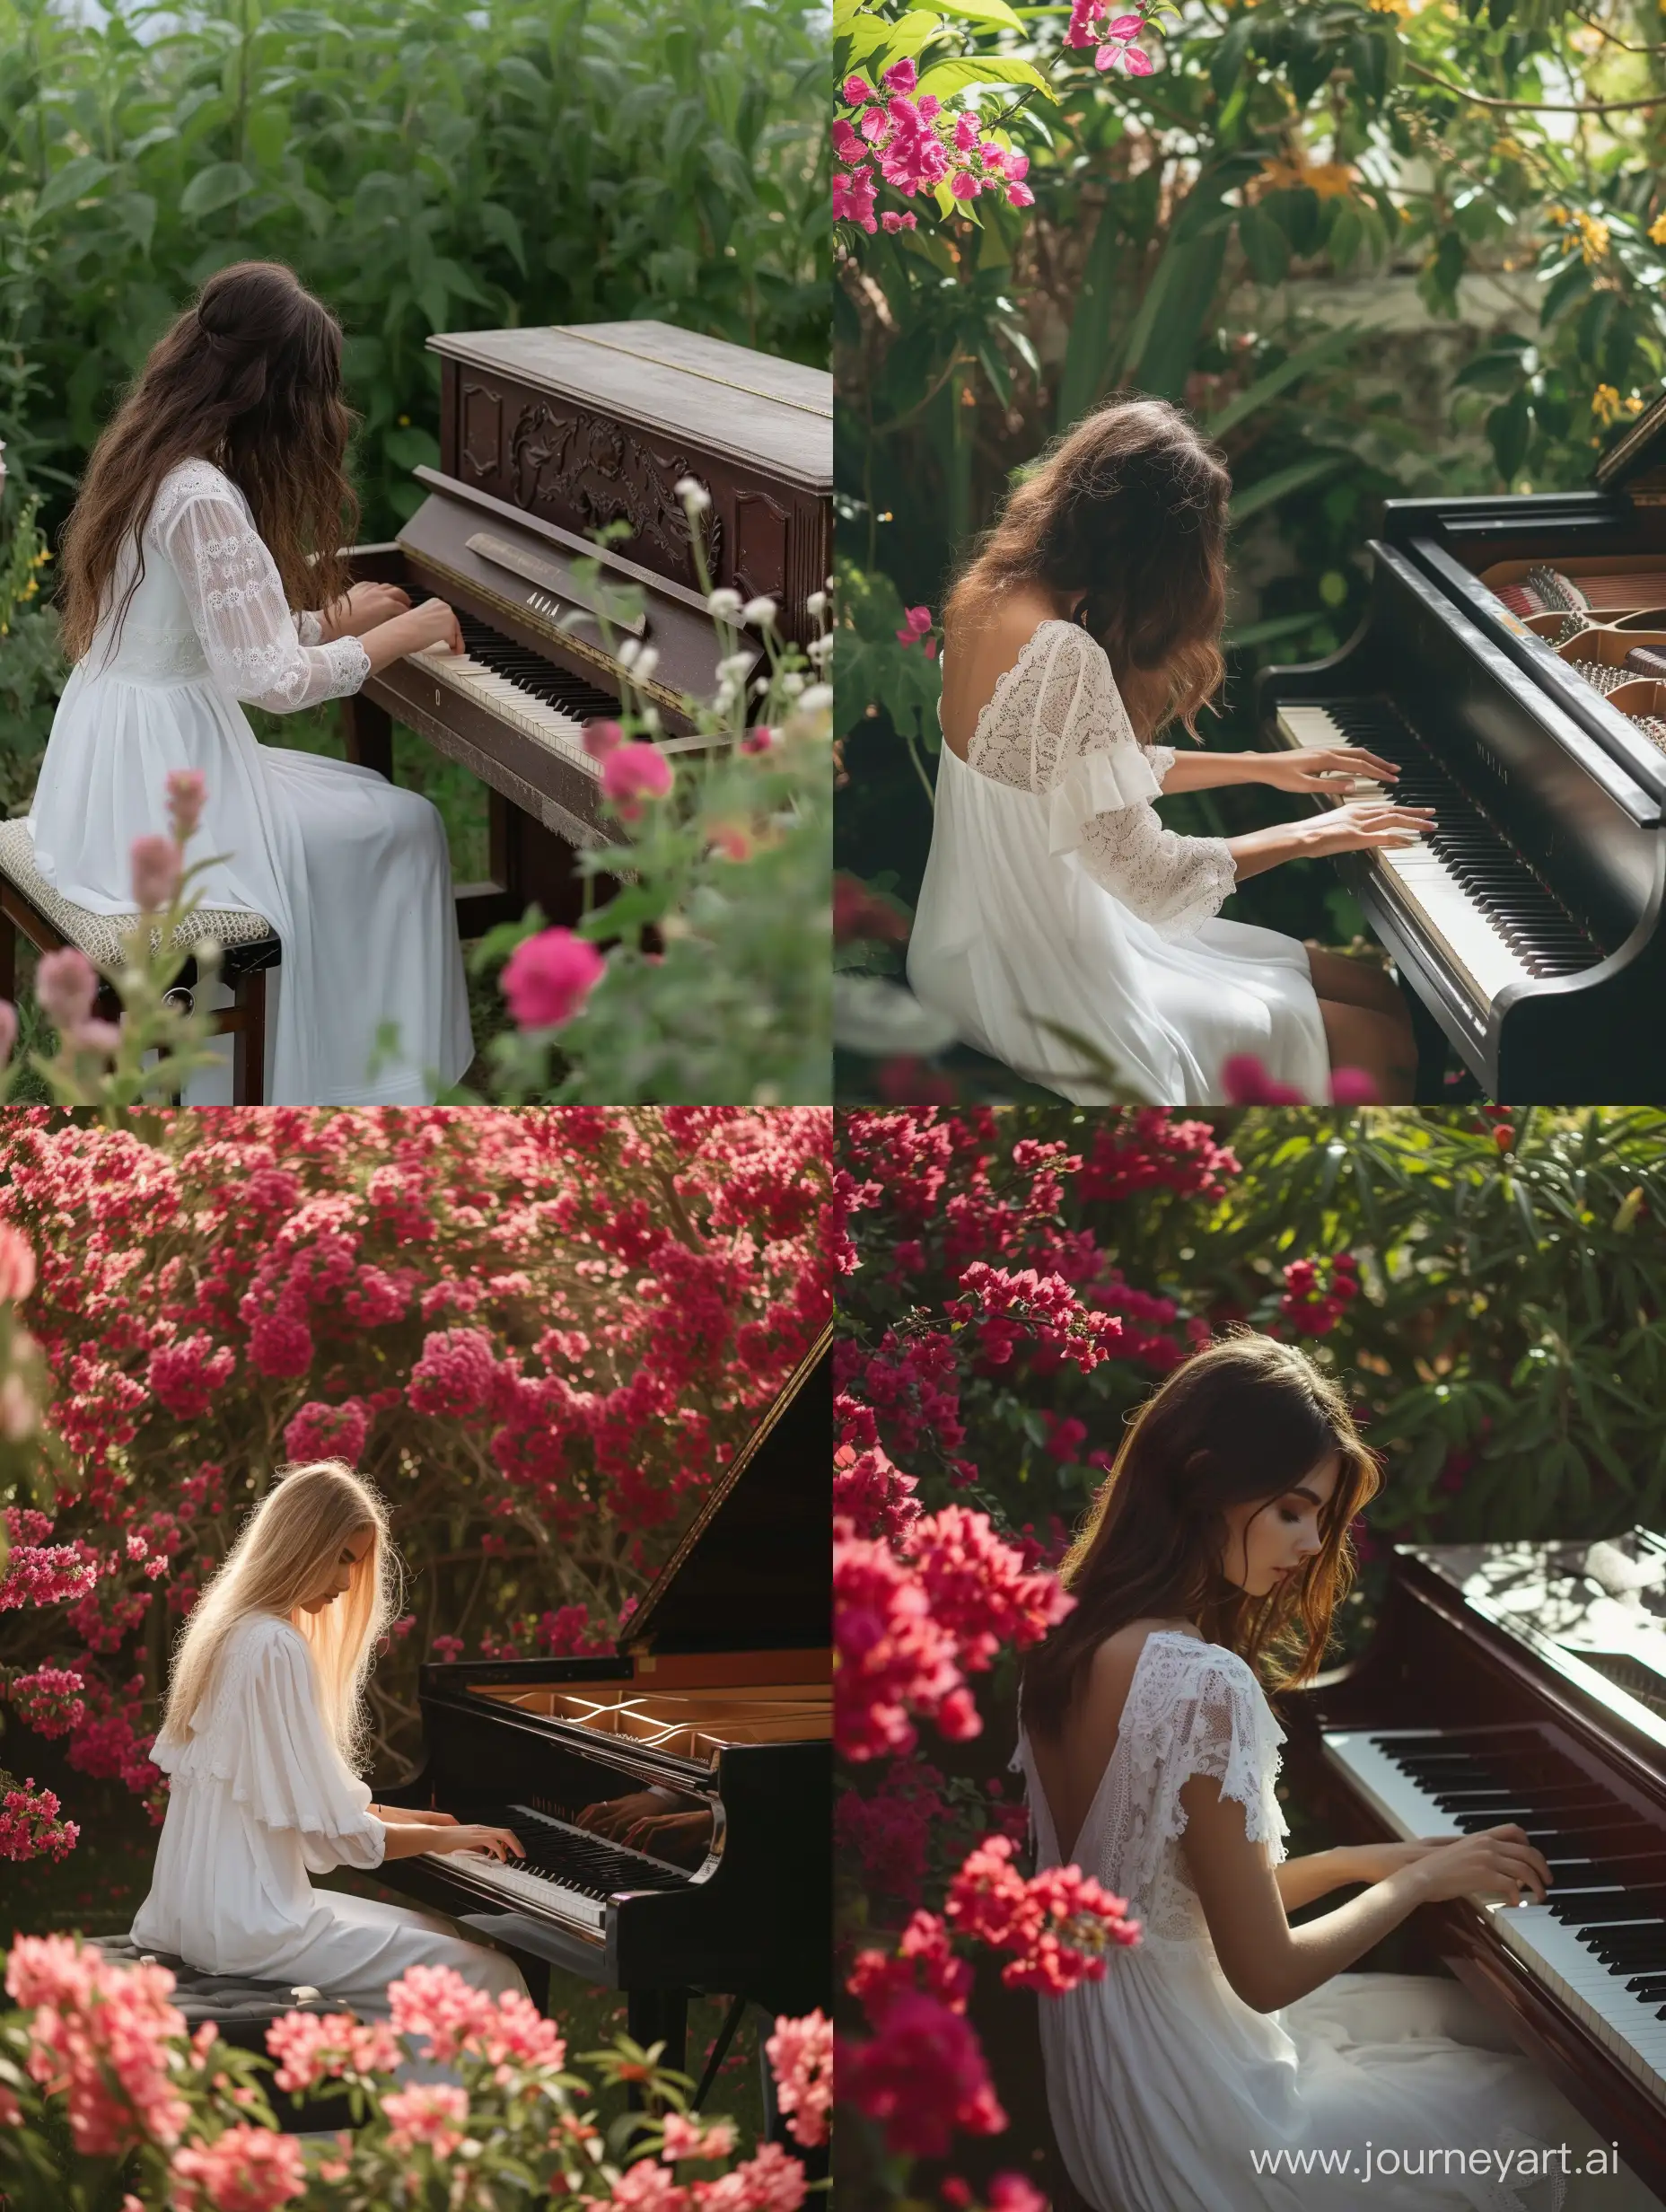 A women with white dress playing piano in garden with loutos flowers